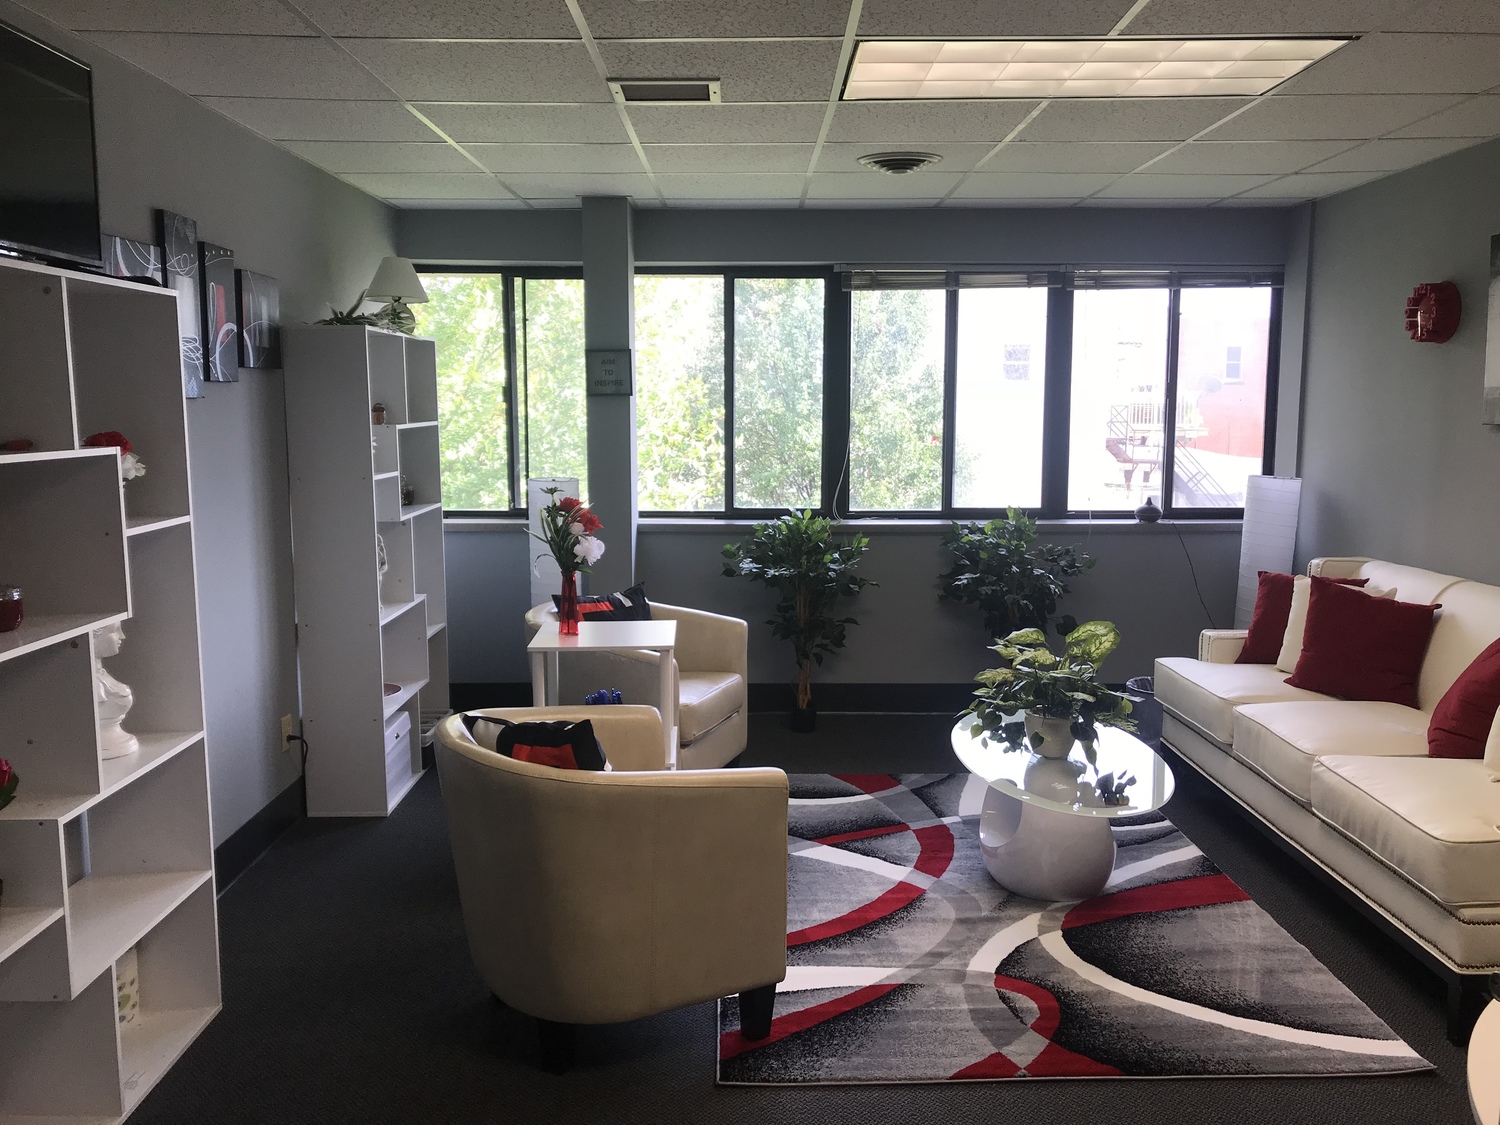 Gallery Photo of New Janesville office